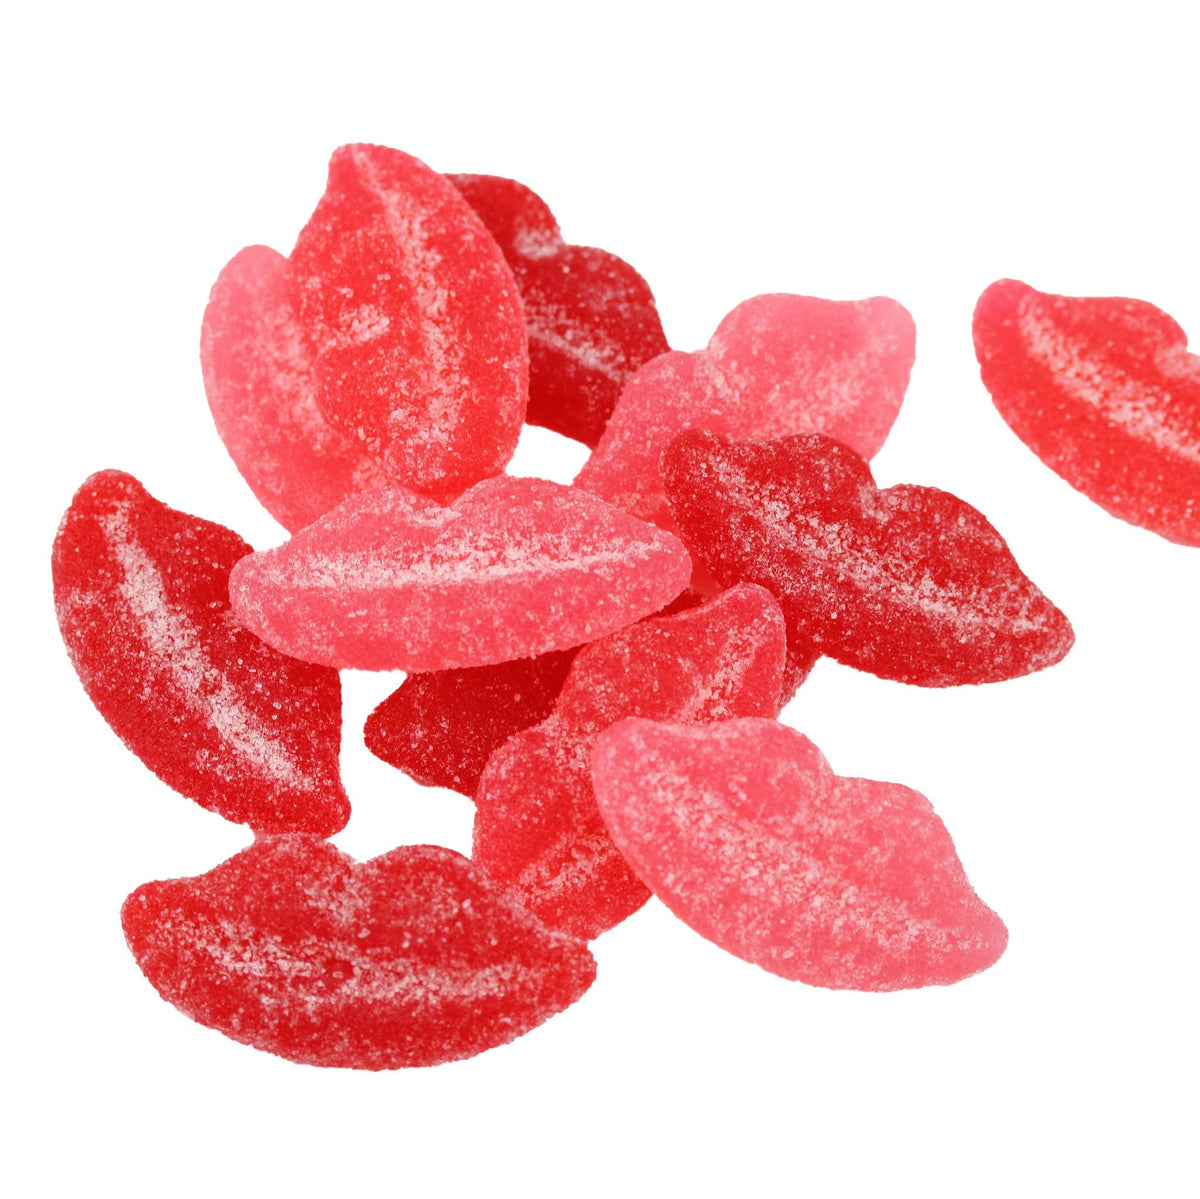 A Giddy Favorite - Sour Pucker Up Lips